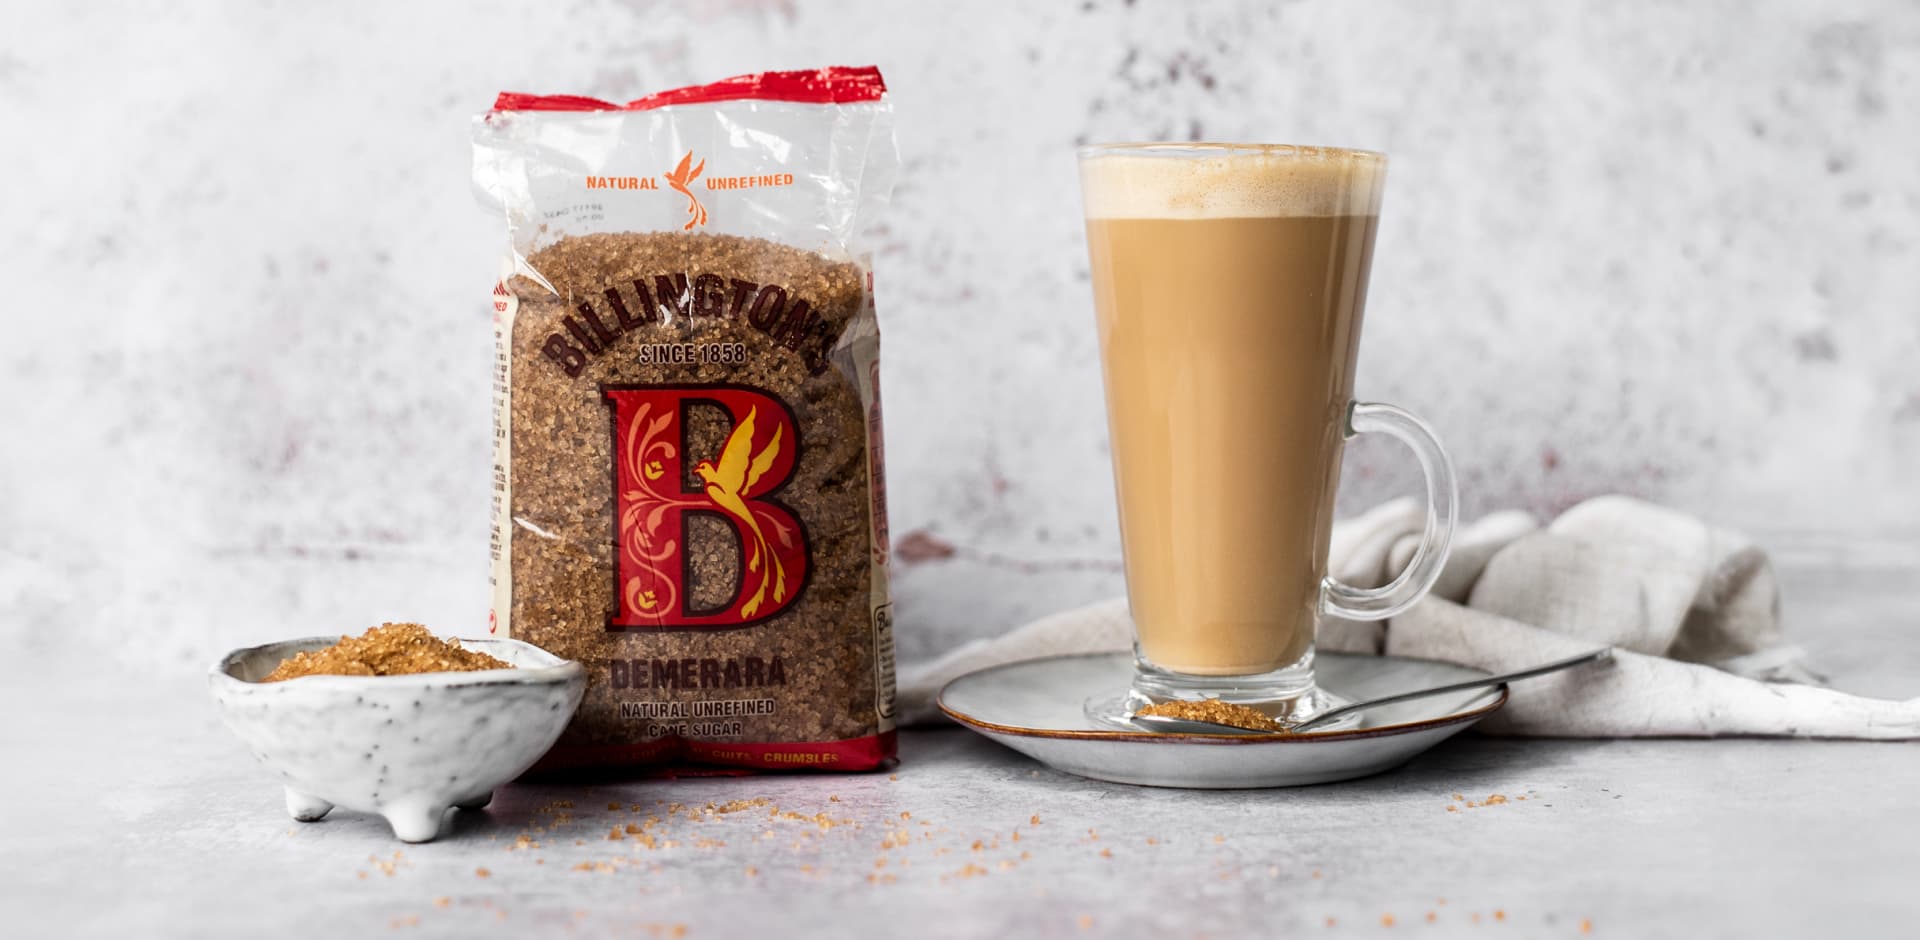 A pack of Billington's Demerara sugar stands next to a frothy latte in a tall glass.